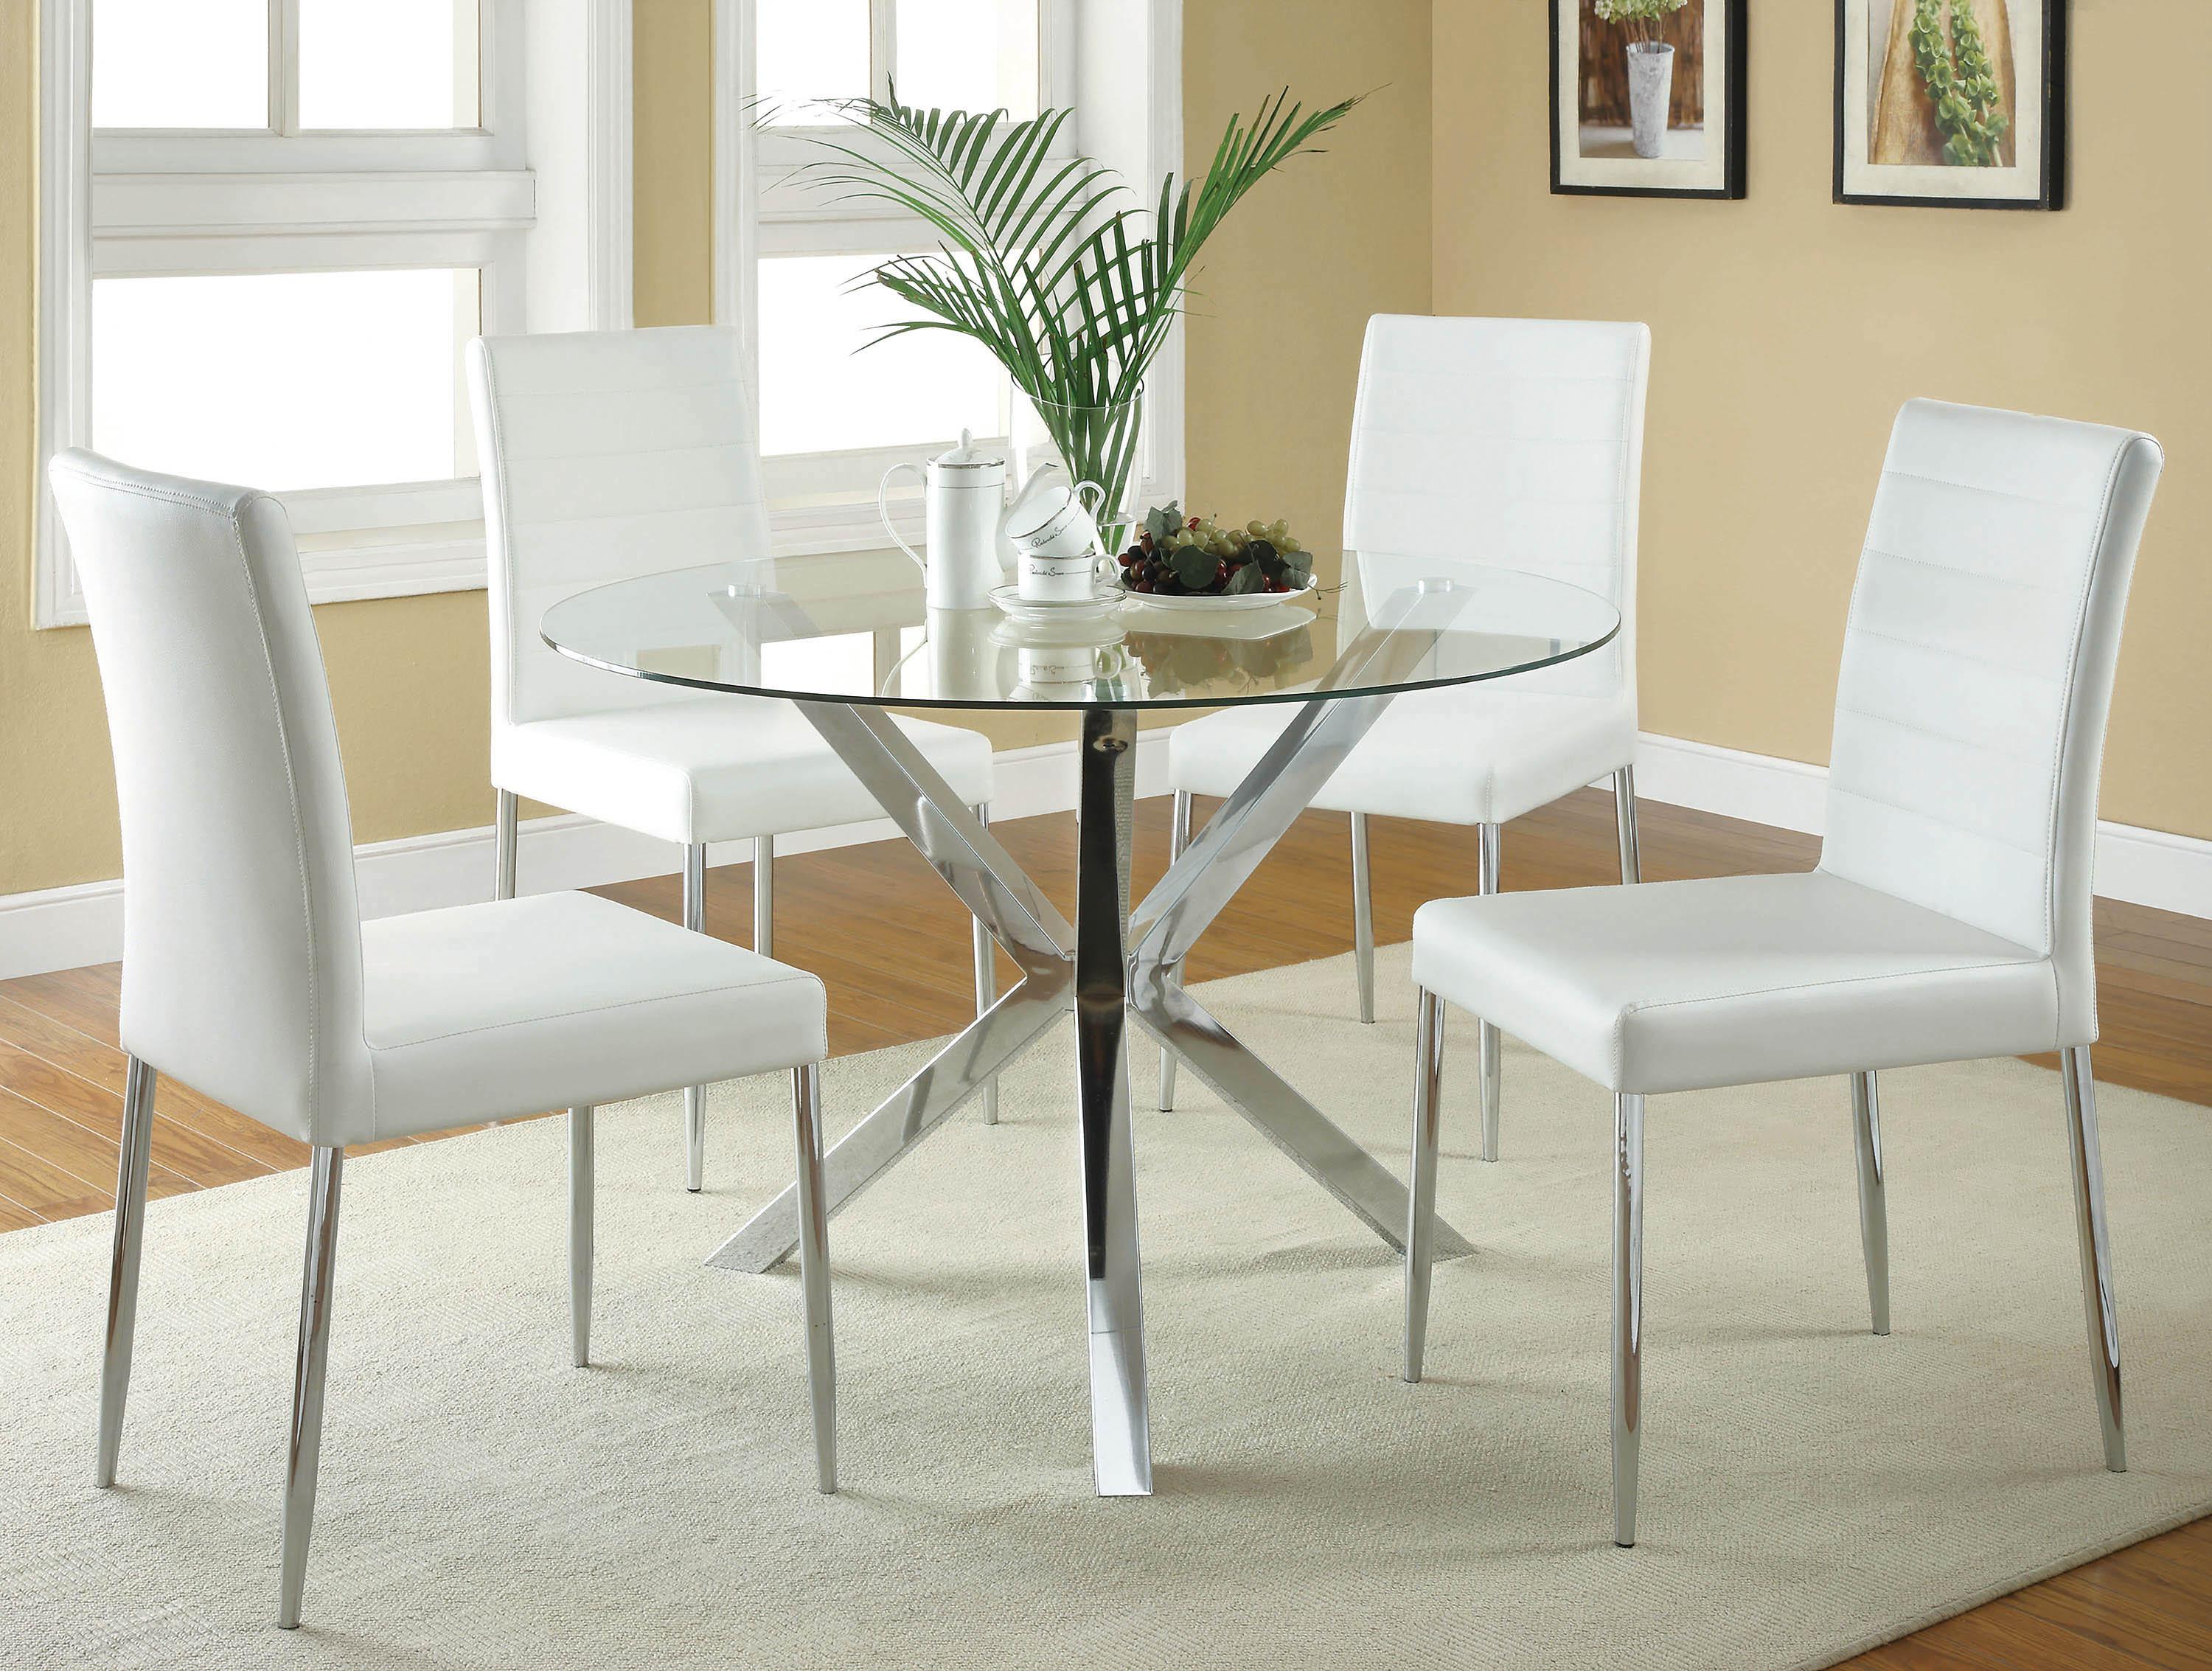 Contemporary Dining Room Set 120760-WHT-S5 Vance 120760-WHT-S5 in White Leatherette